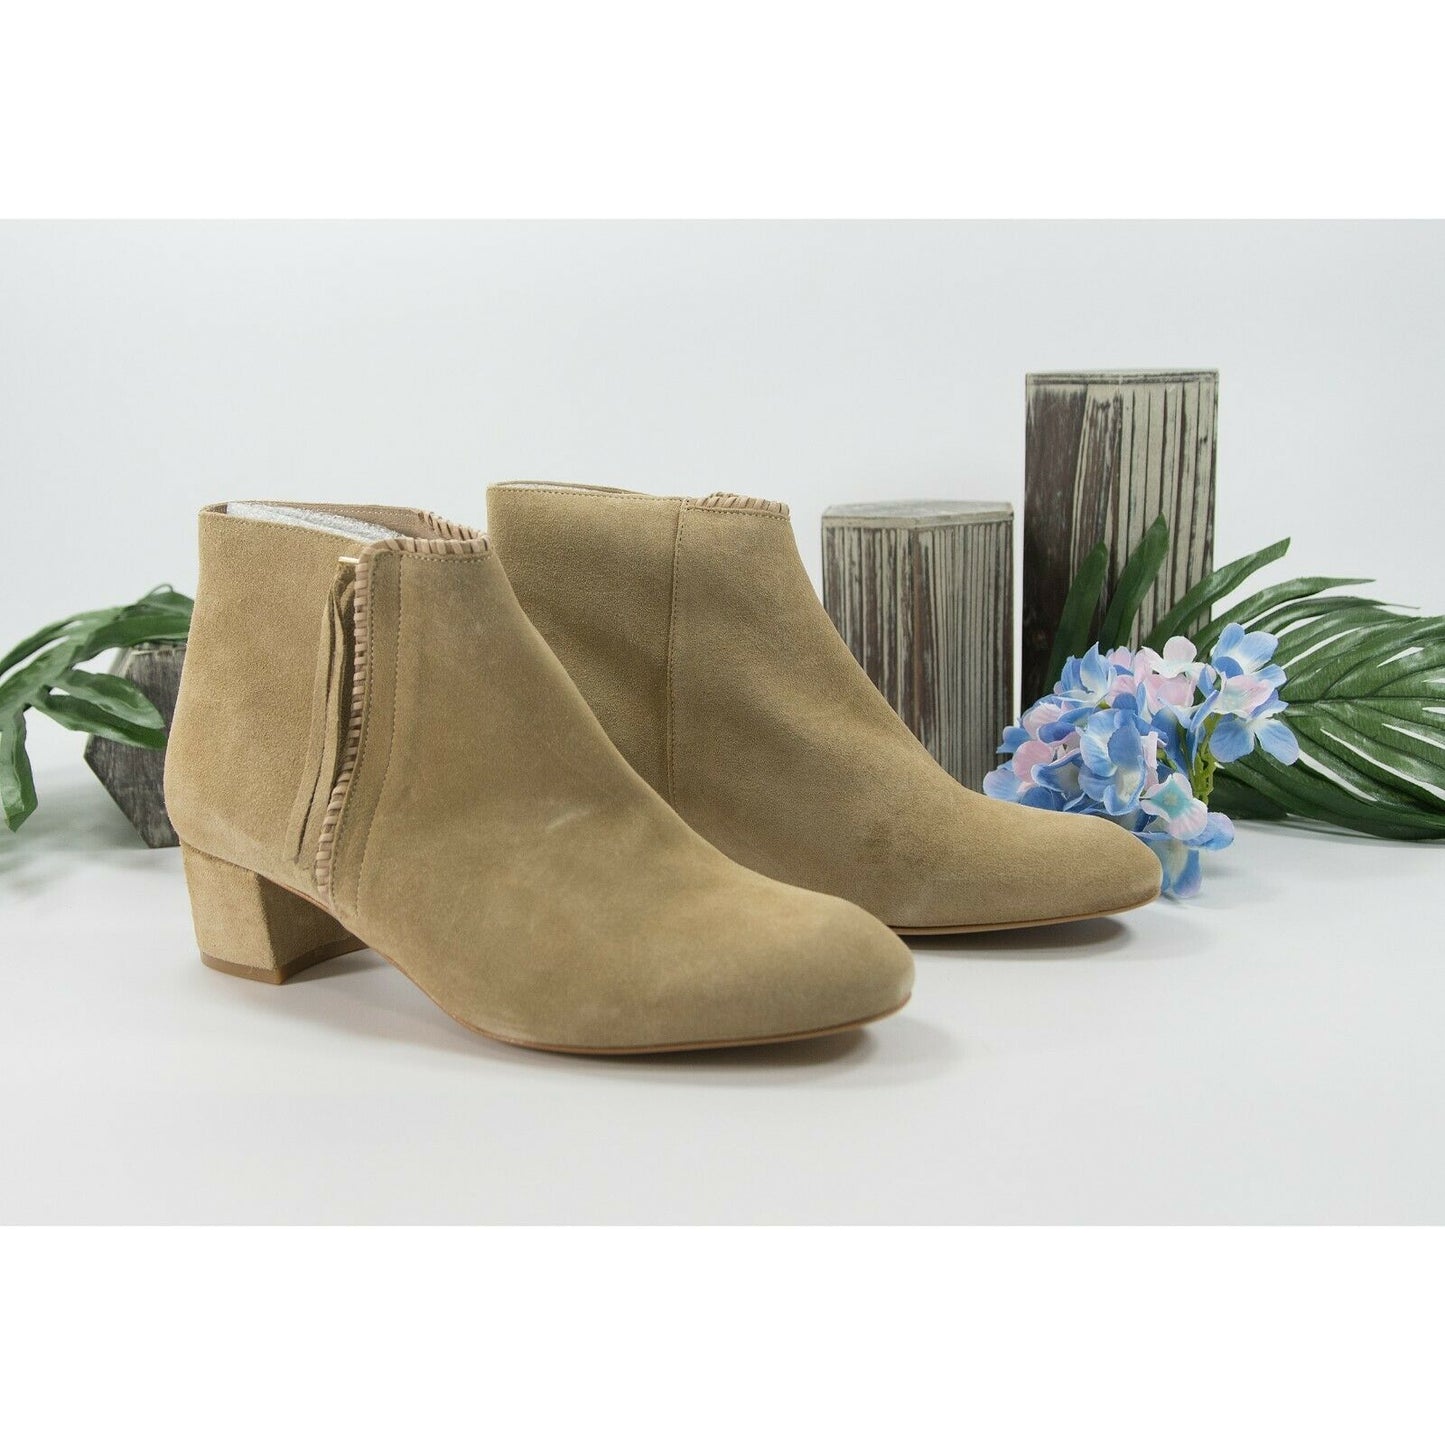 Maje Camel Suede Felicia Bootie Ankle Boot Shoes Sz 40 10